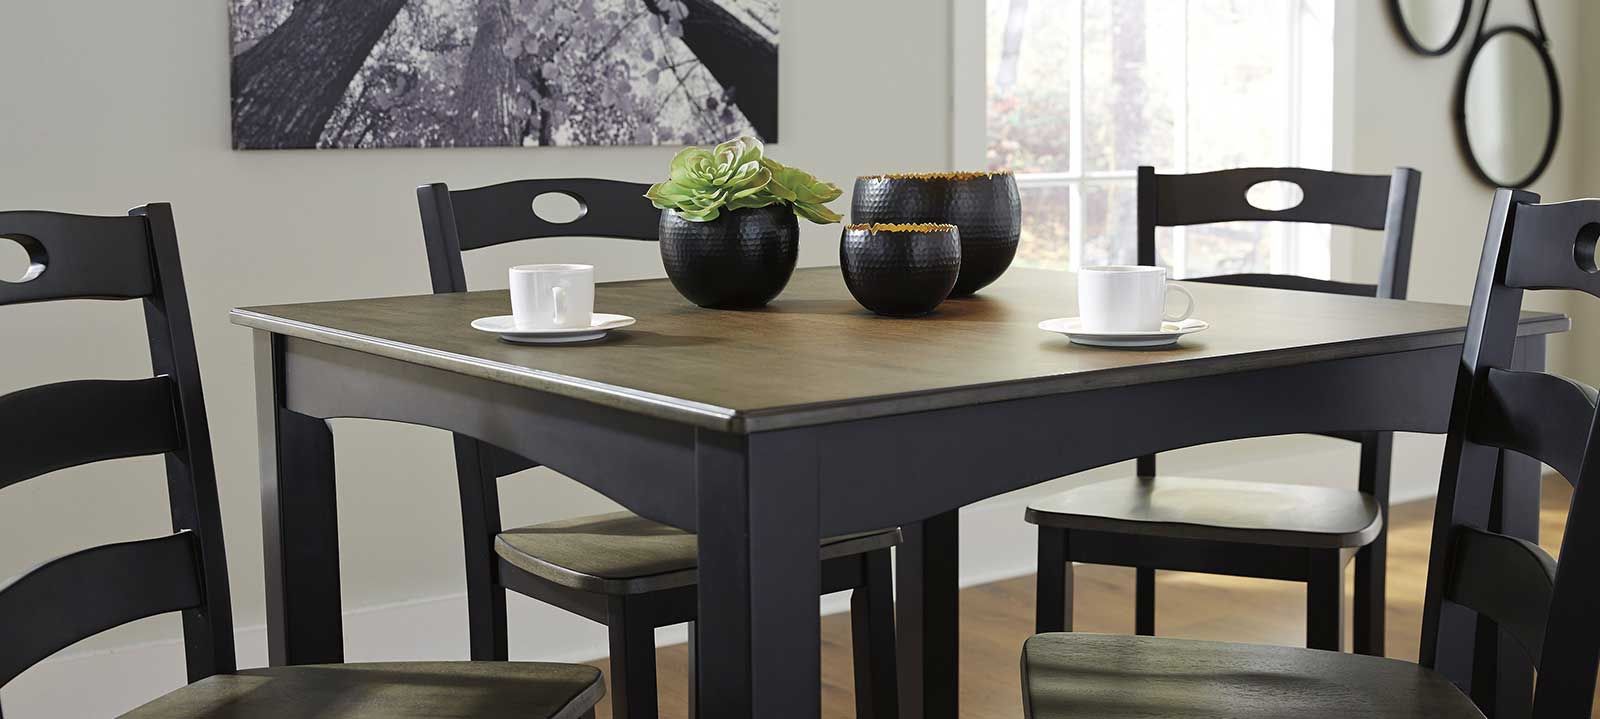 Dining Room Furniture To Feed And Entertain In St (View 13 of 20)